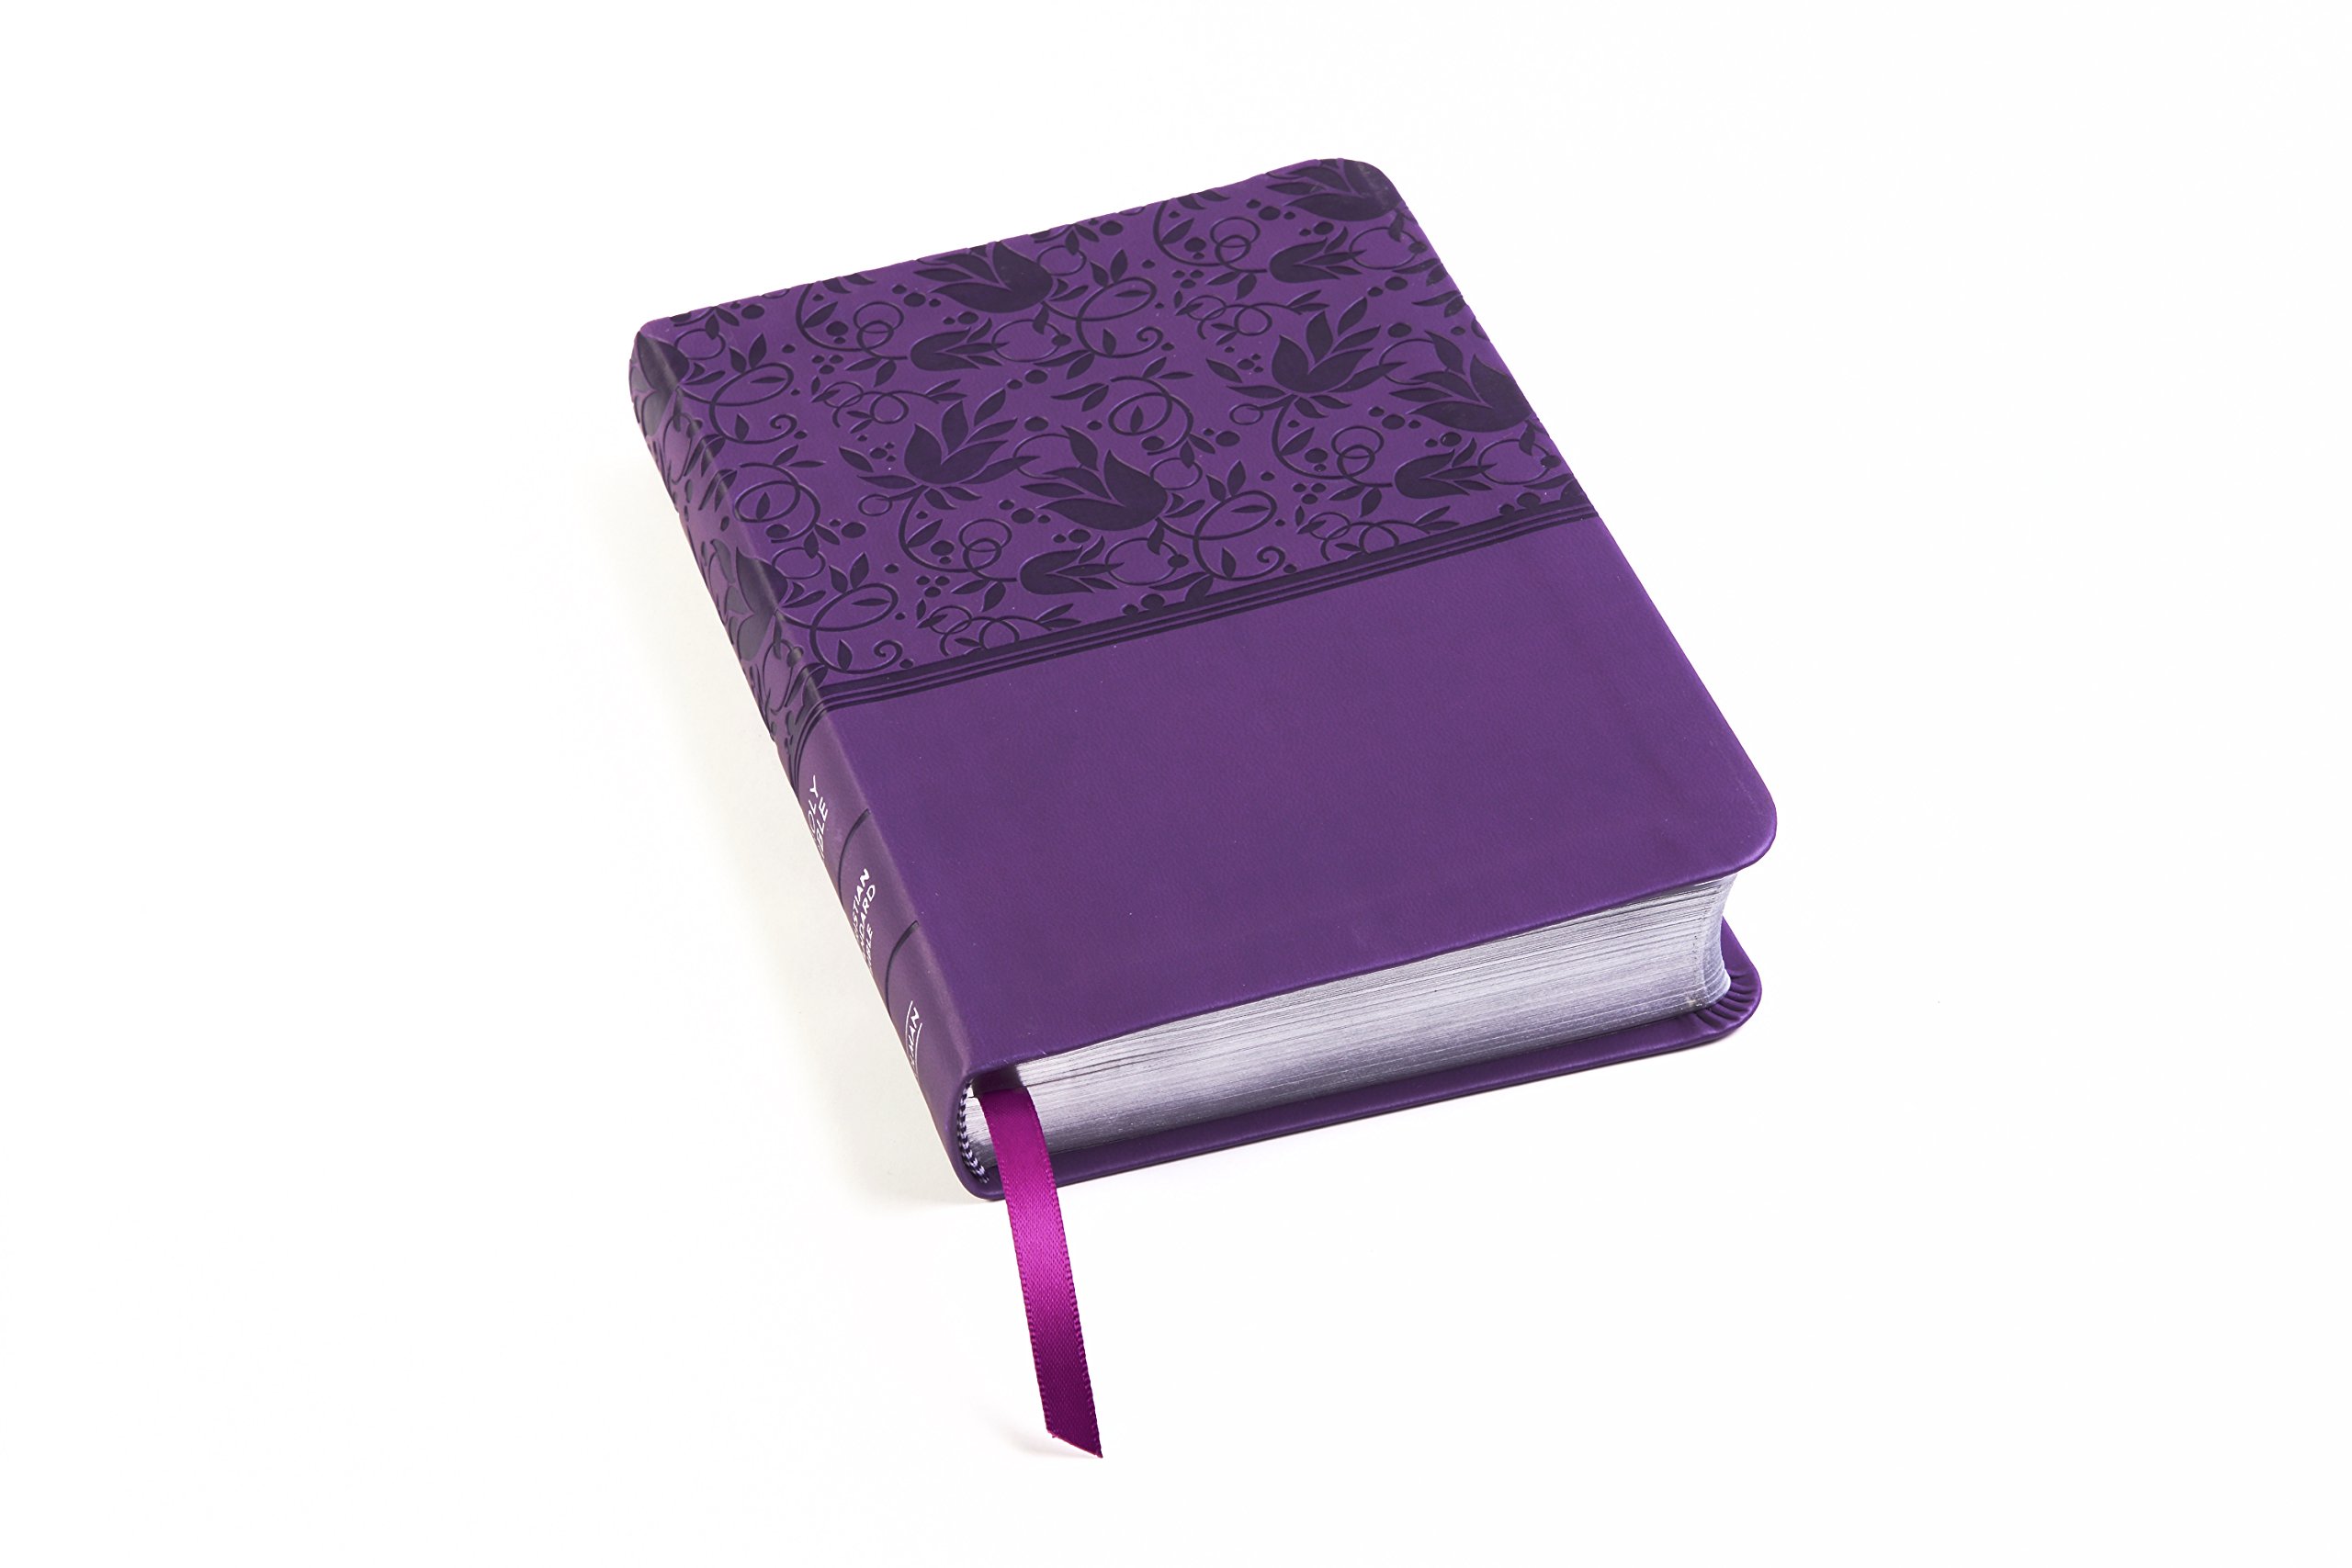 CSB Compact Ultrathin Bible, Purple LeatherTouch, Indexed